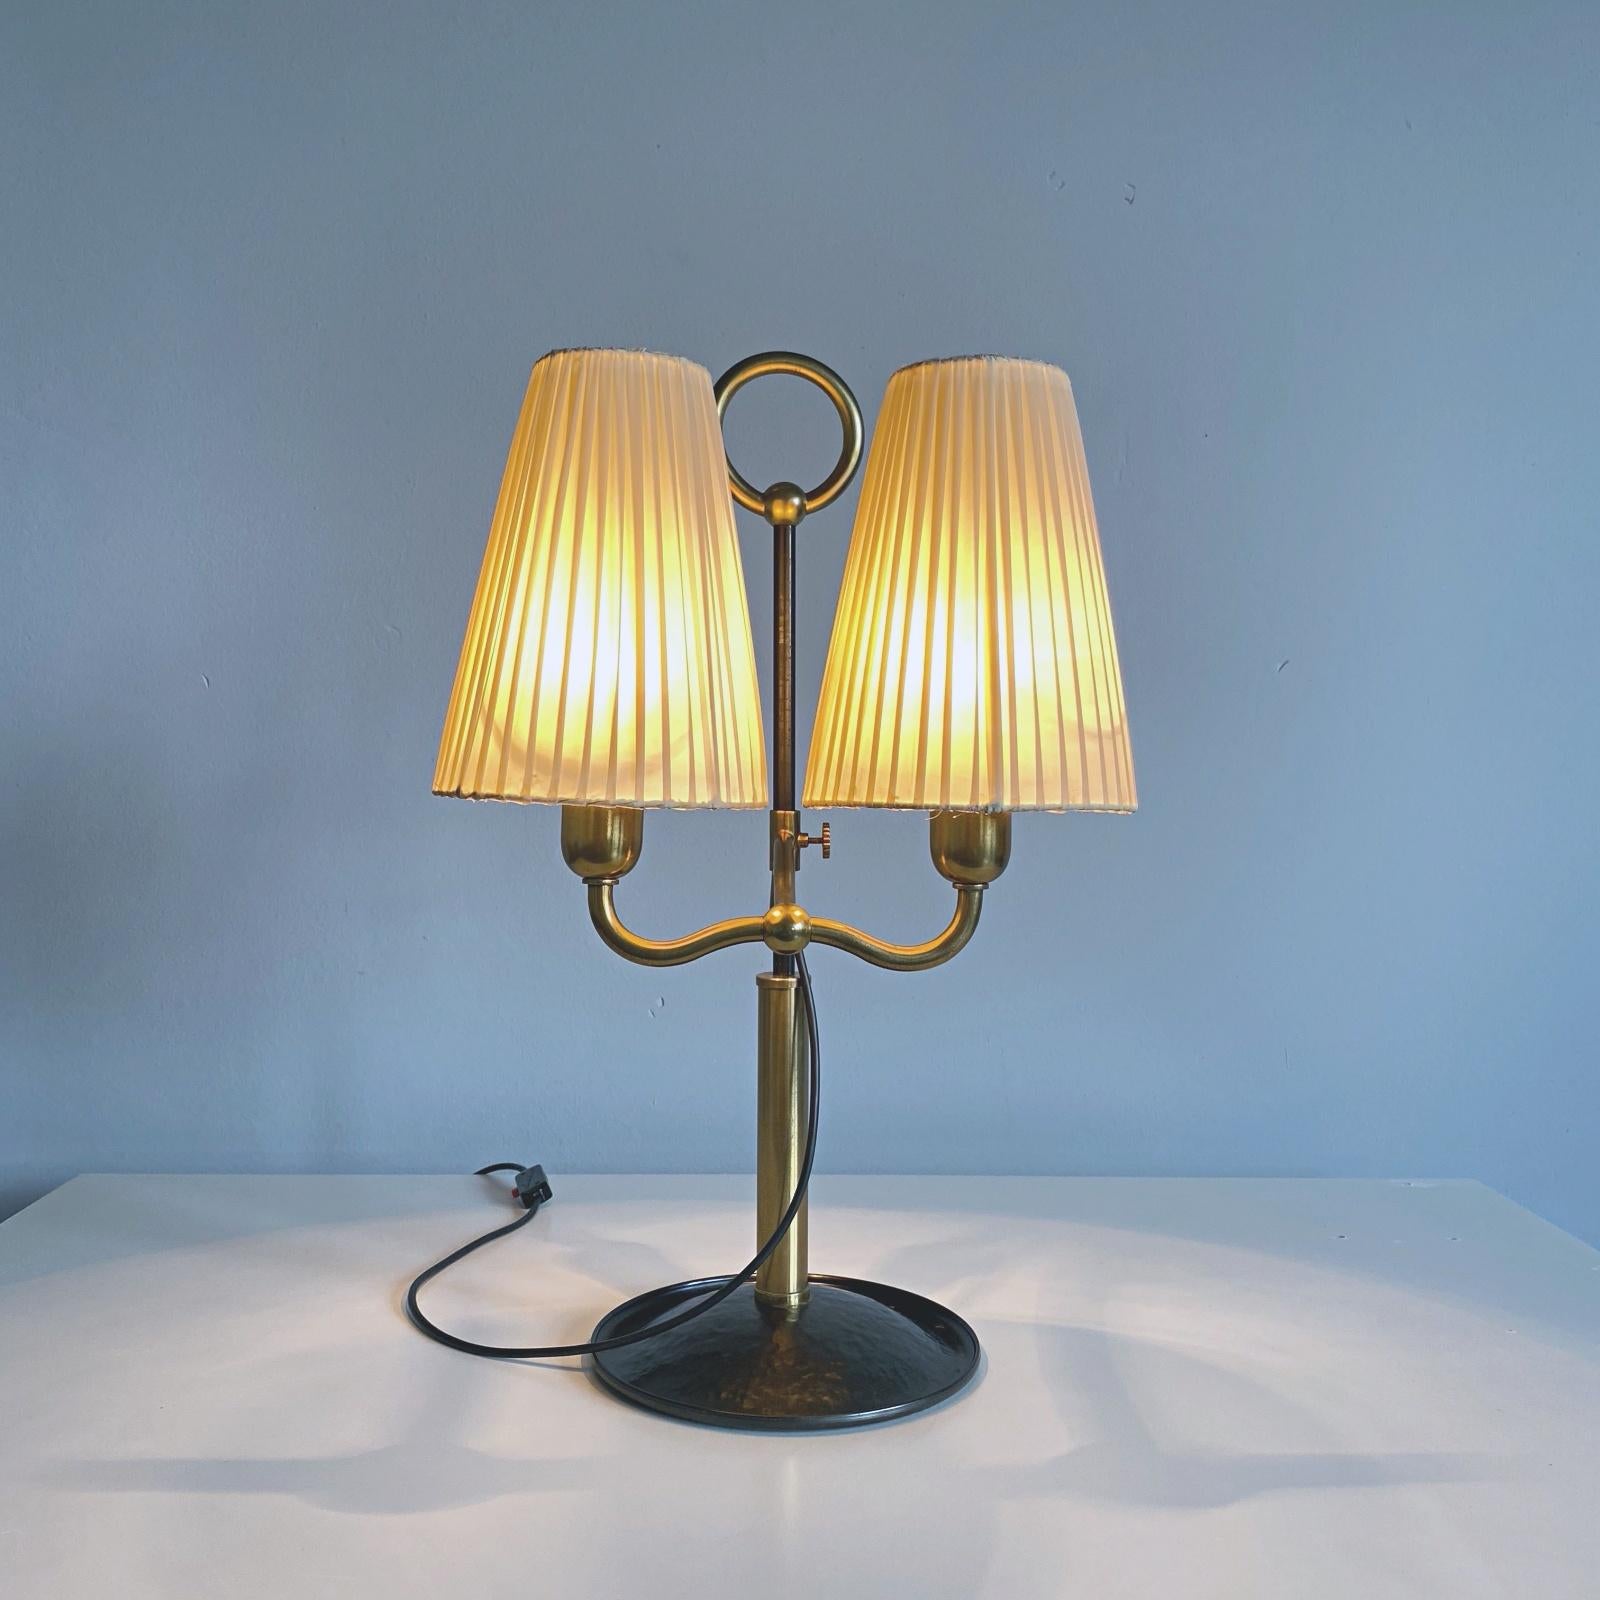 Forged Josef Frank Two Light Brass Table Lamp, Viennese Modern Age, Austria For Sale